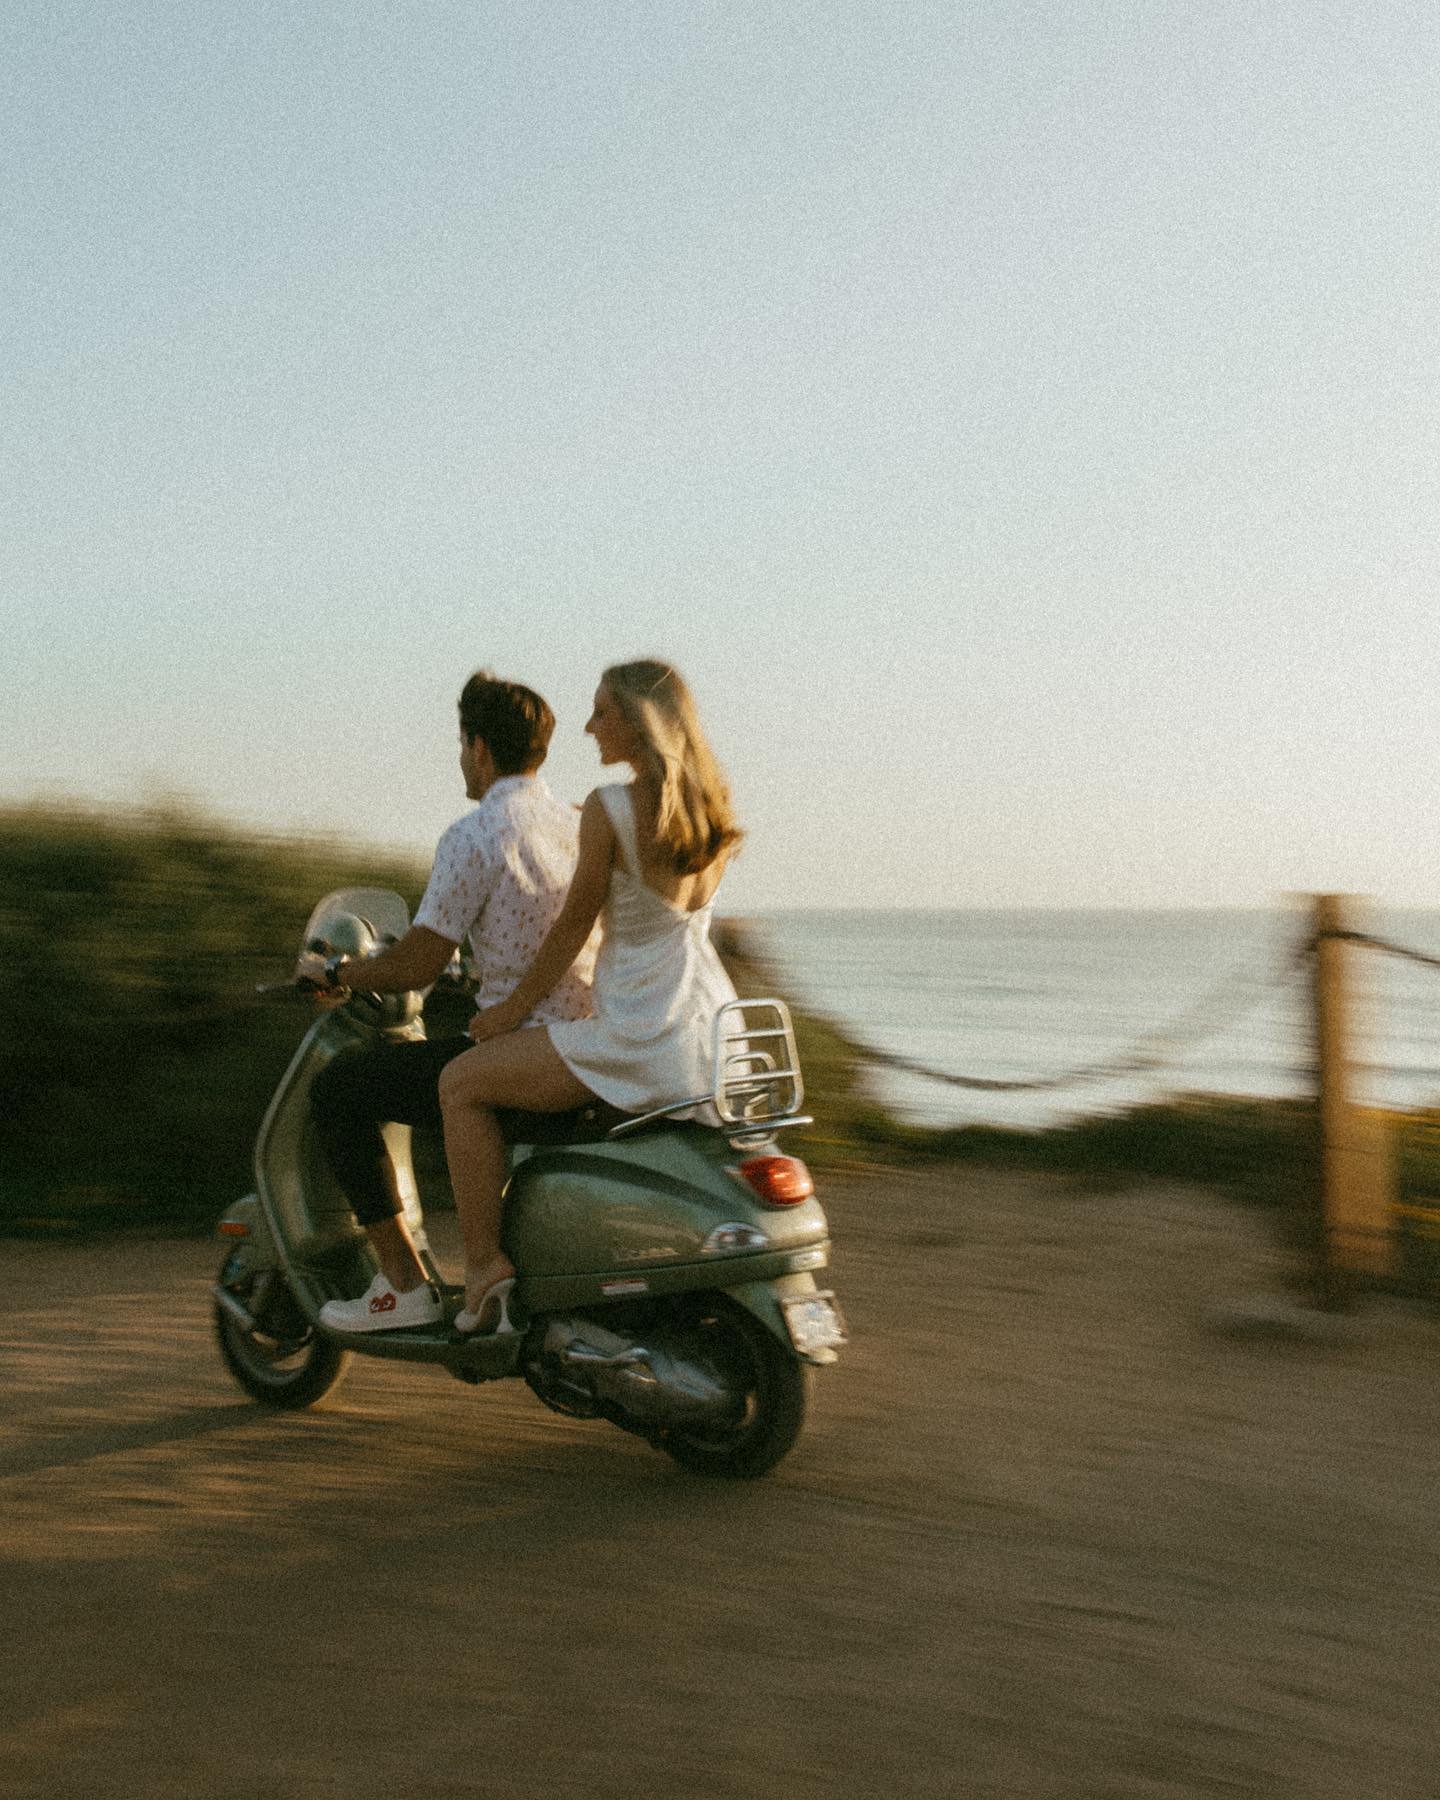 Pt. 1 - S &amp; P engagements @ the cliffs ❤️&zwj;🔥 These two cuties are getting married in Italy next year so they brought their Italian Vespa vibes to the beach for their engagements, 10/10 recommend making your engagements feel like you, these we